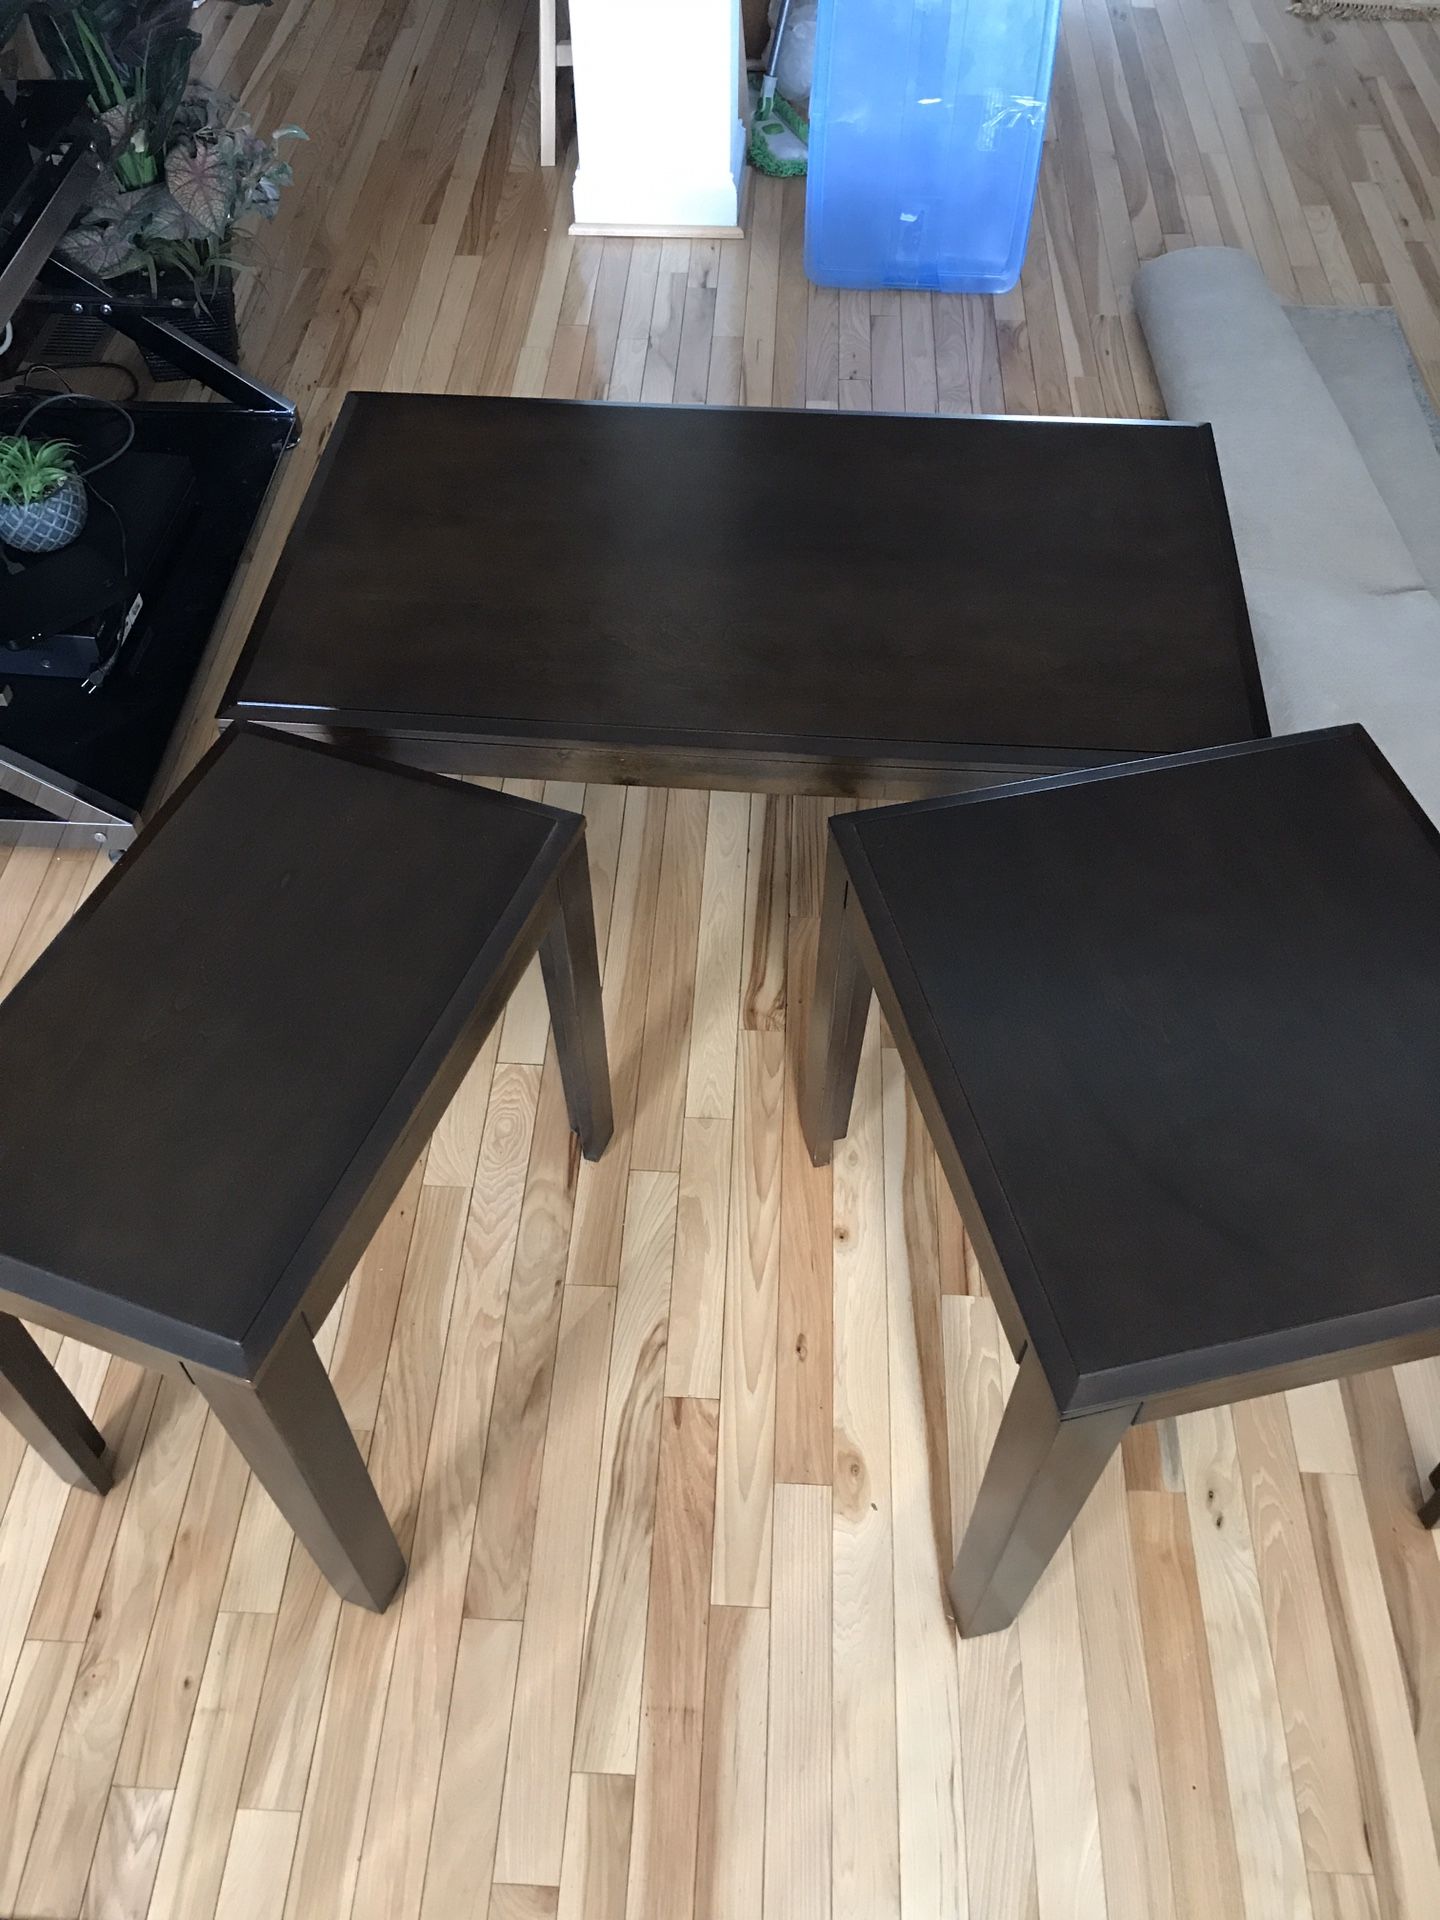 Espresso coffee table end tables set